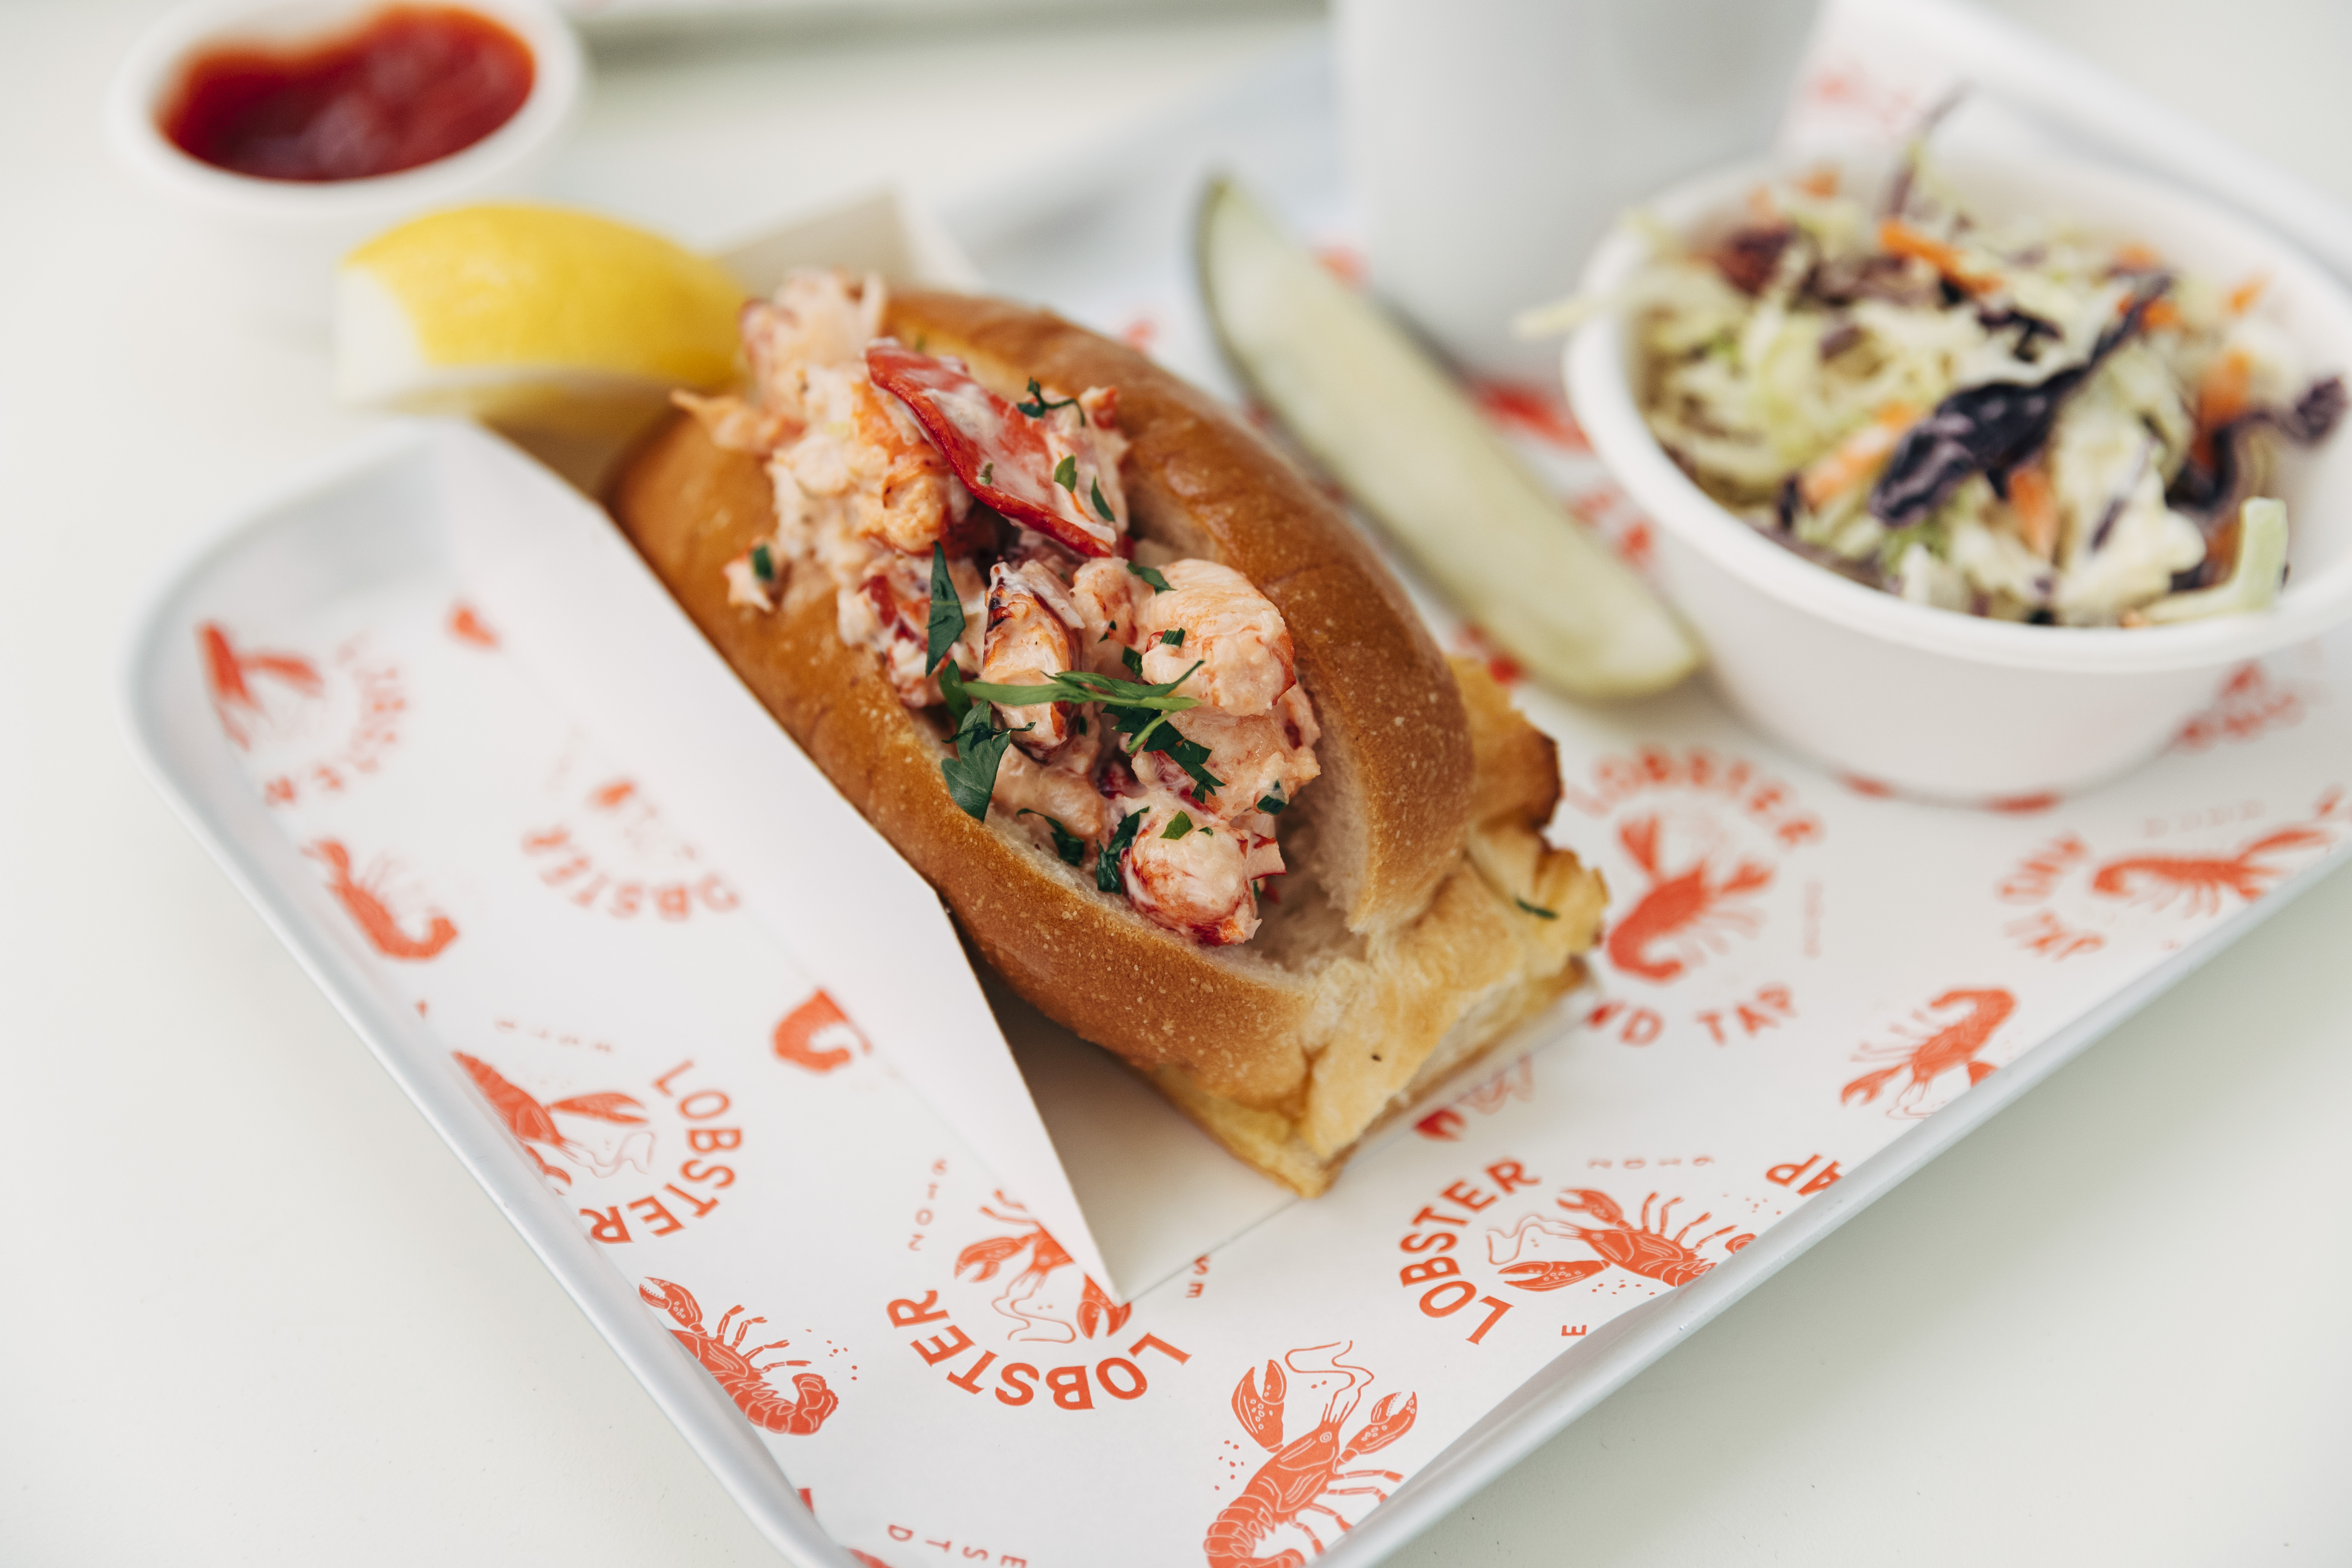 Lobster and Tap and coleslaw